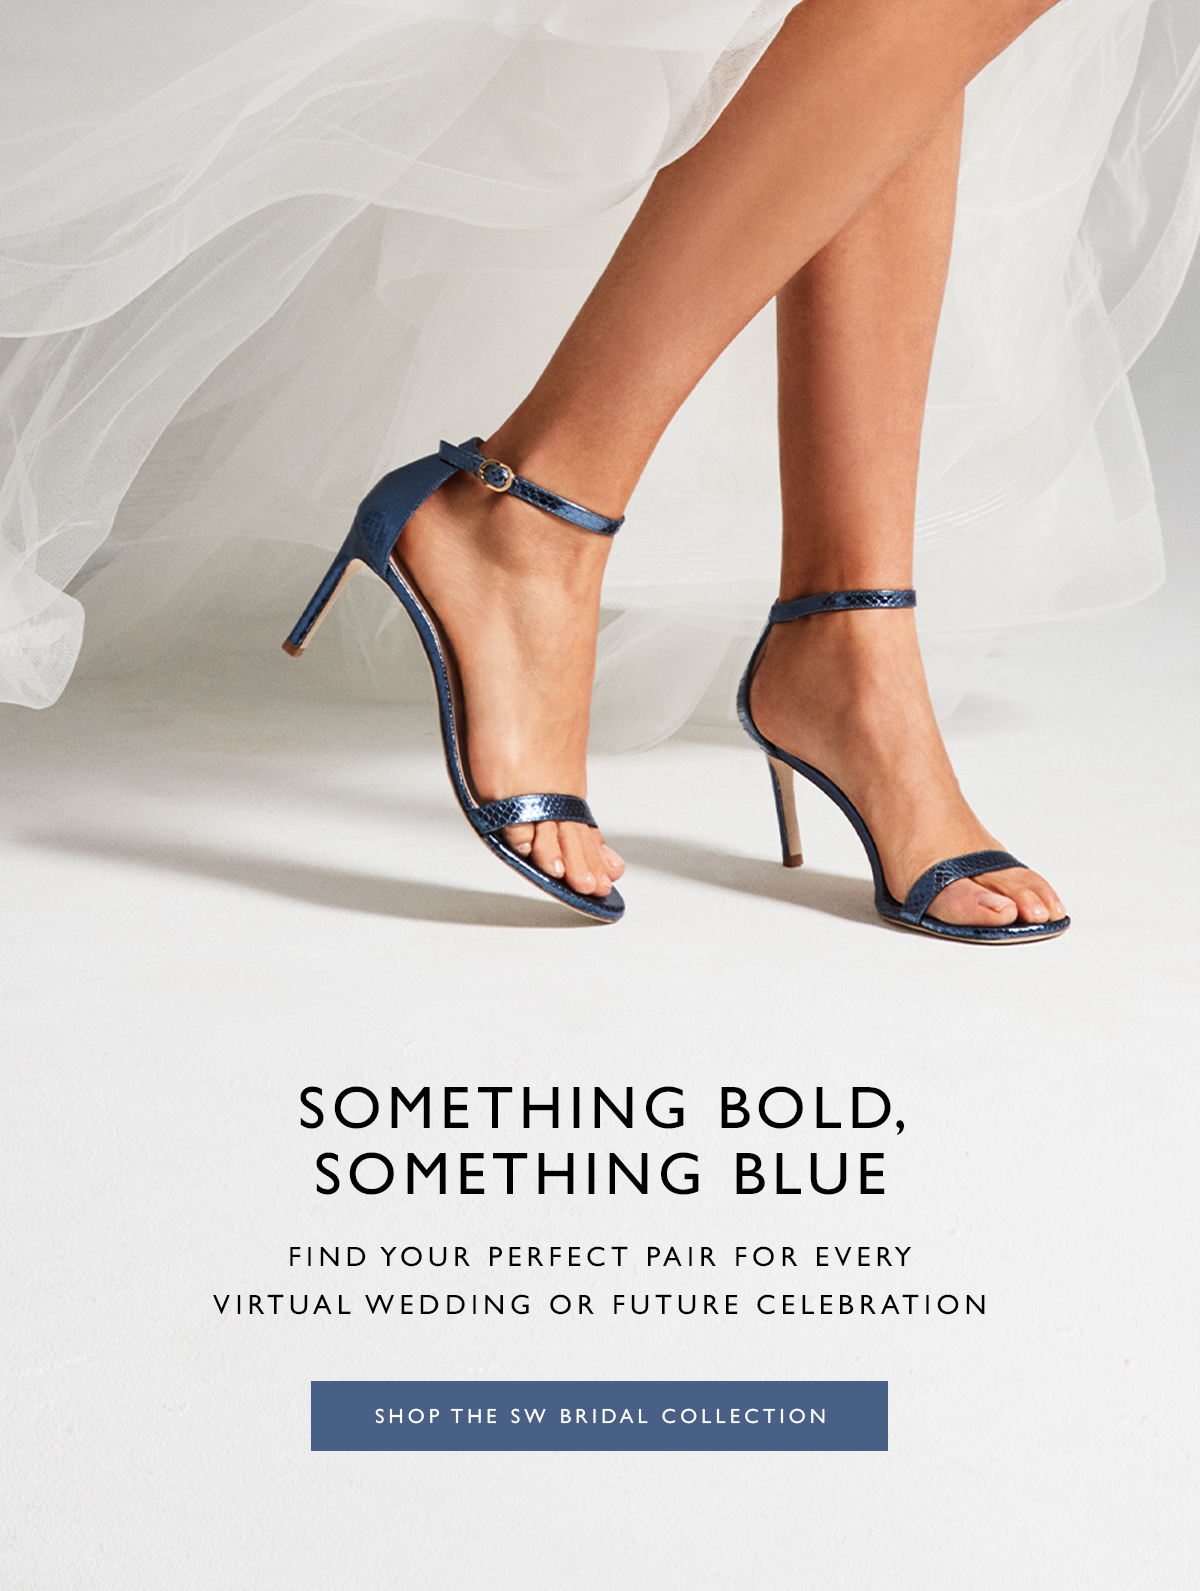 Something Bold, Something Blue. Find your perfect pair for every virtual wedding or future celebration. SHOP THE SW BRIDAL COLLECTION